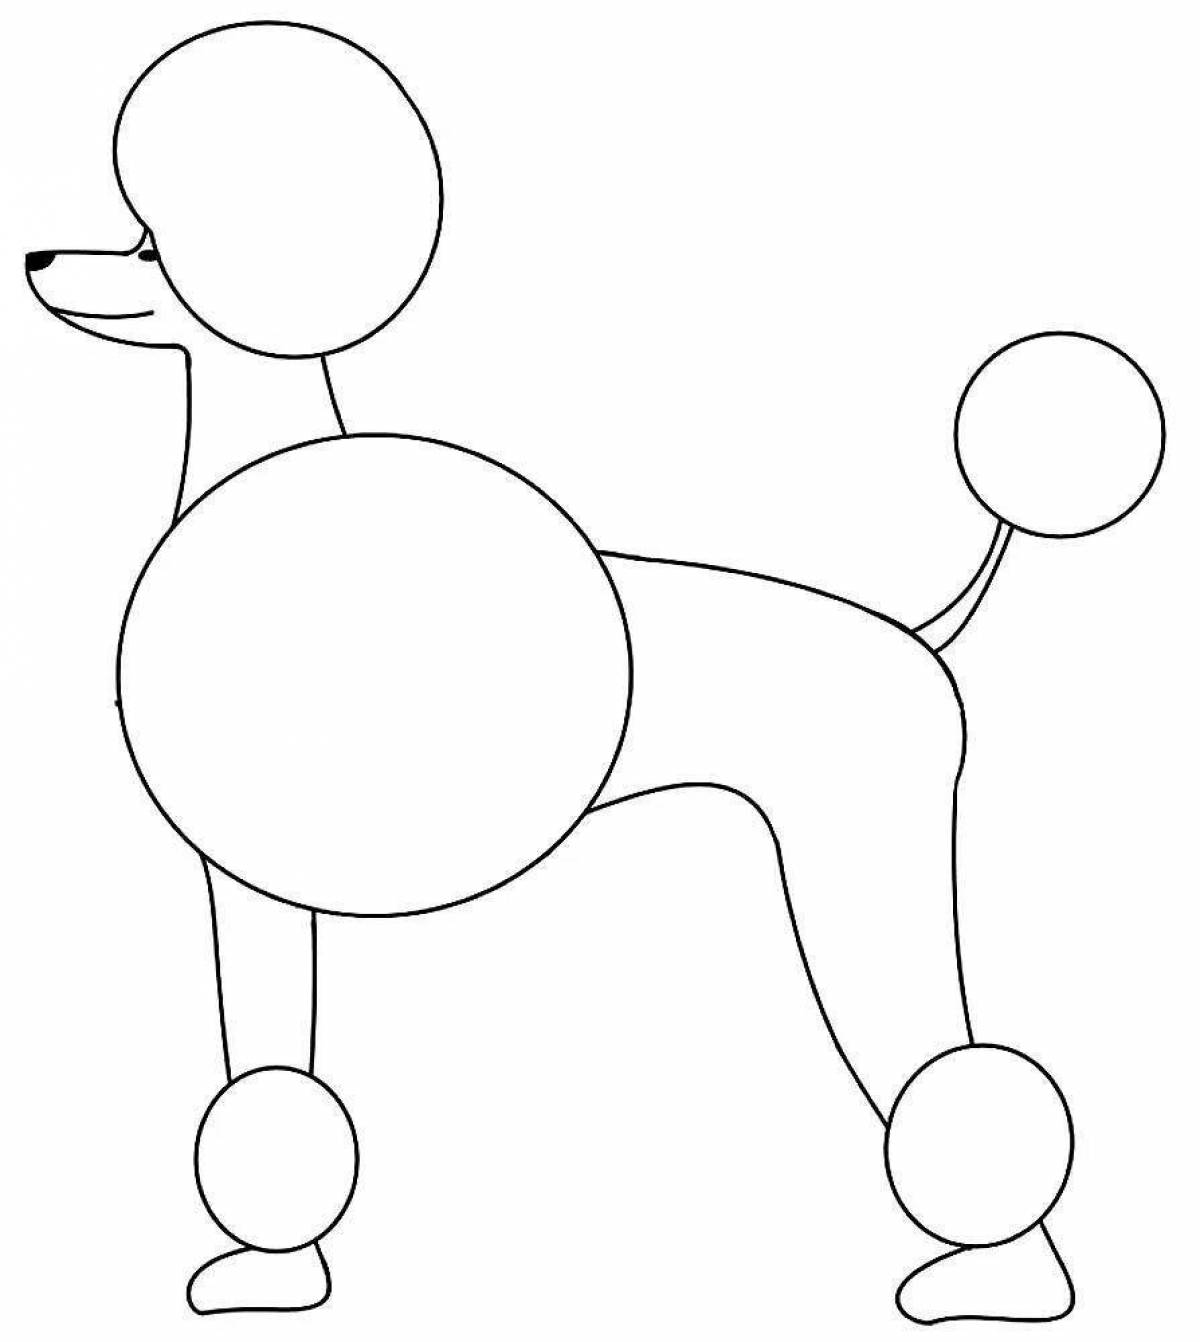 Sweet poodle coloring pages for kids